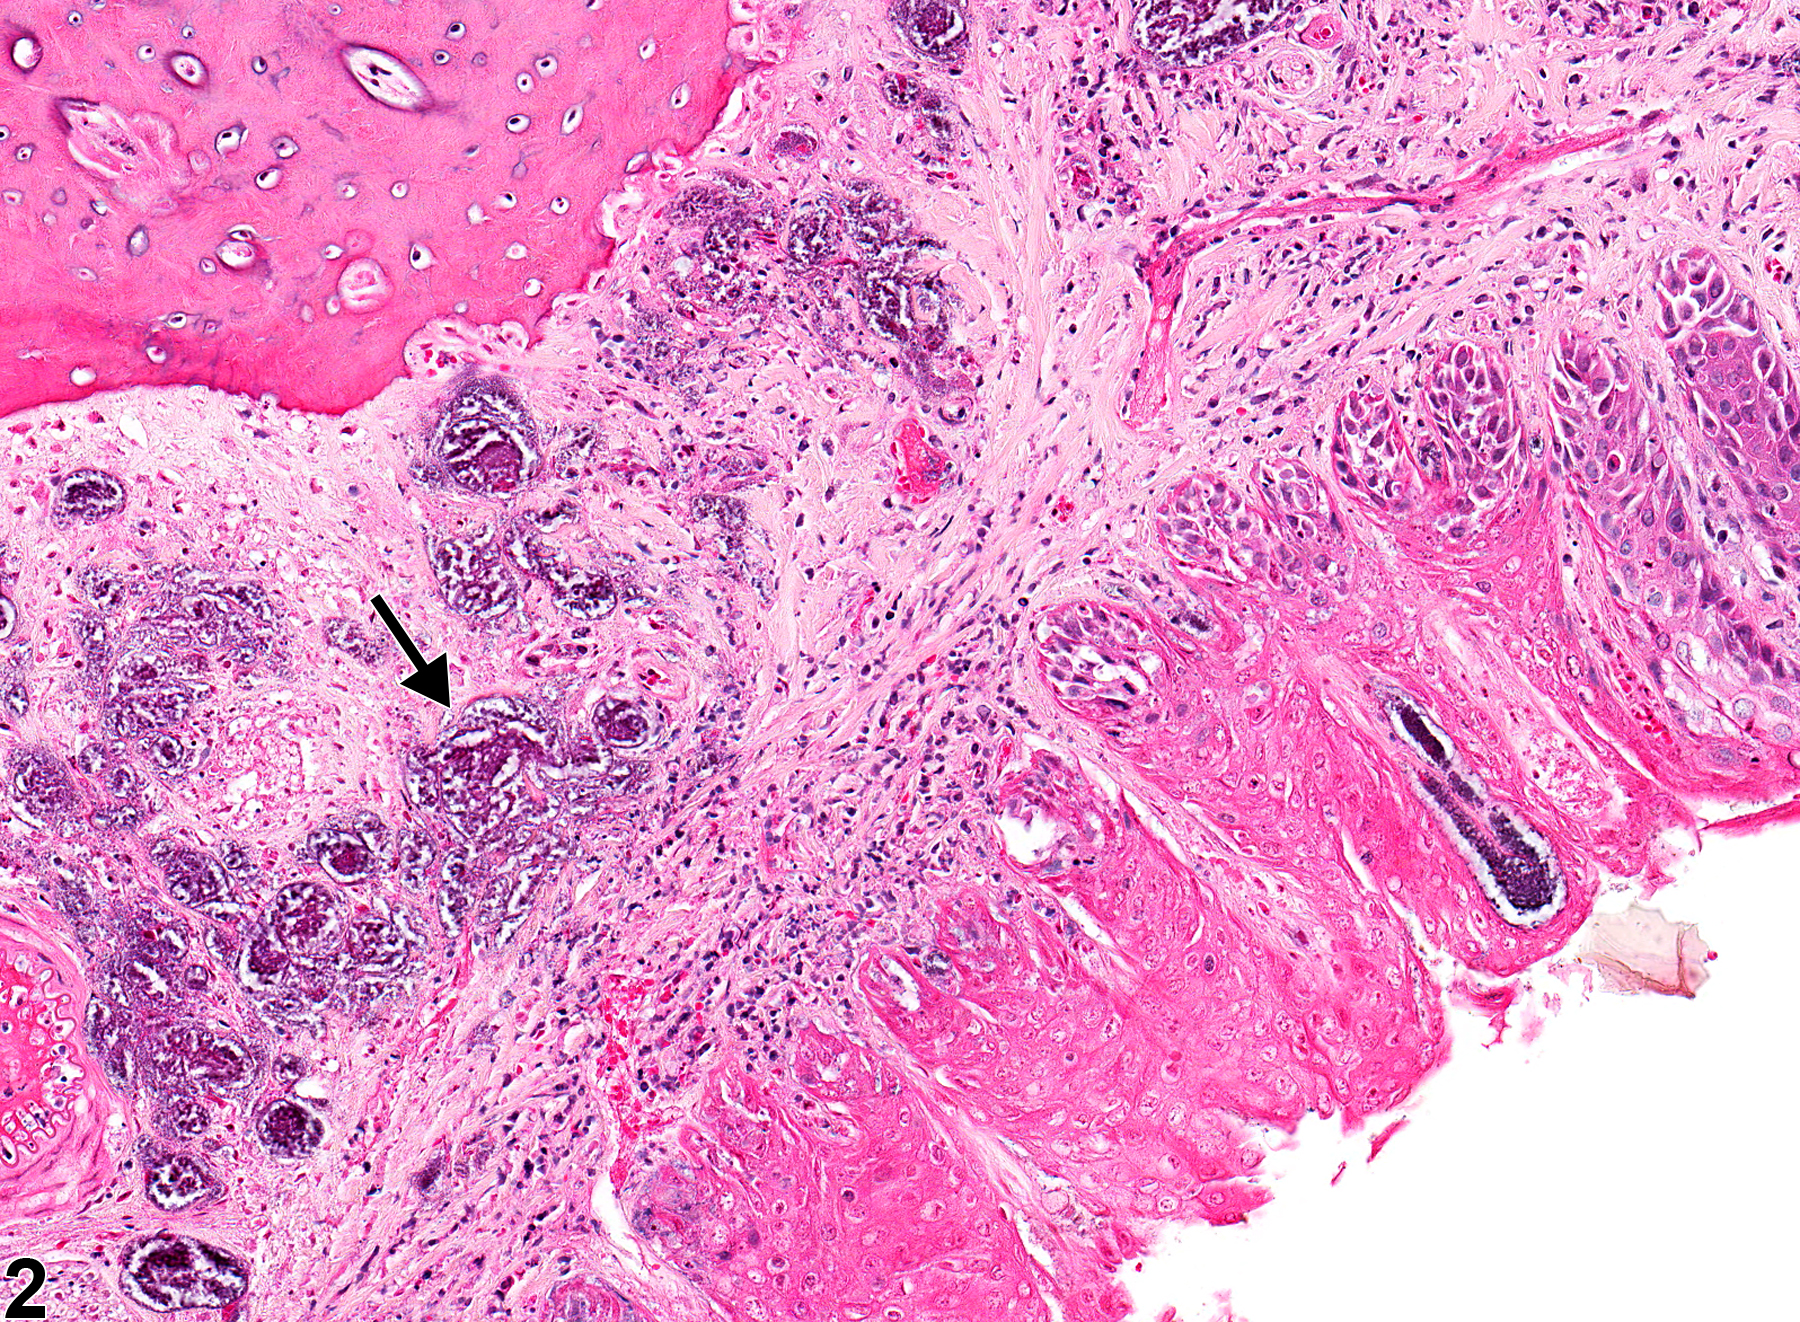 Image of necrosis in the oral mucosa from a male F344/N rat in a subchronic study